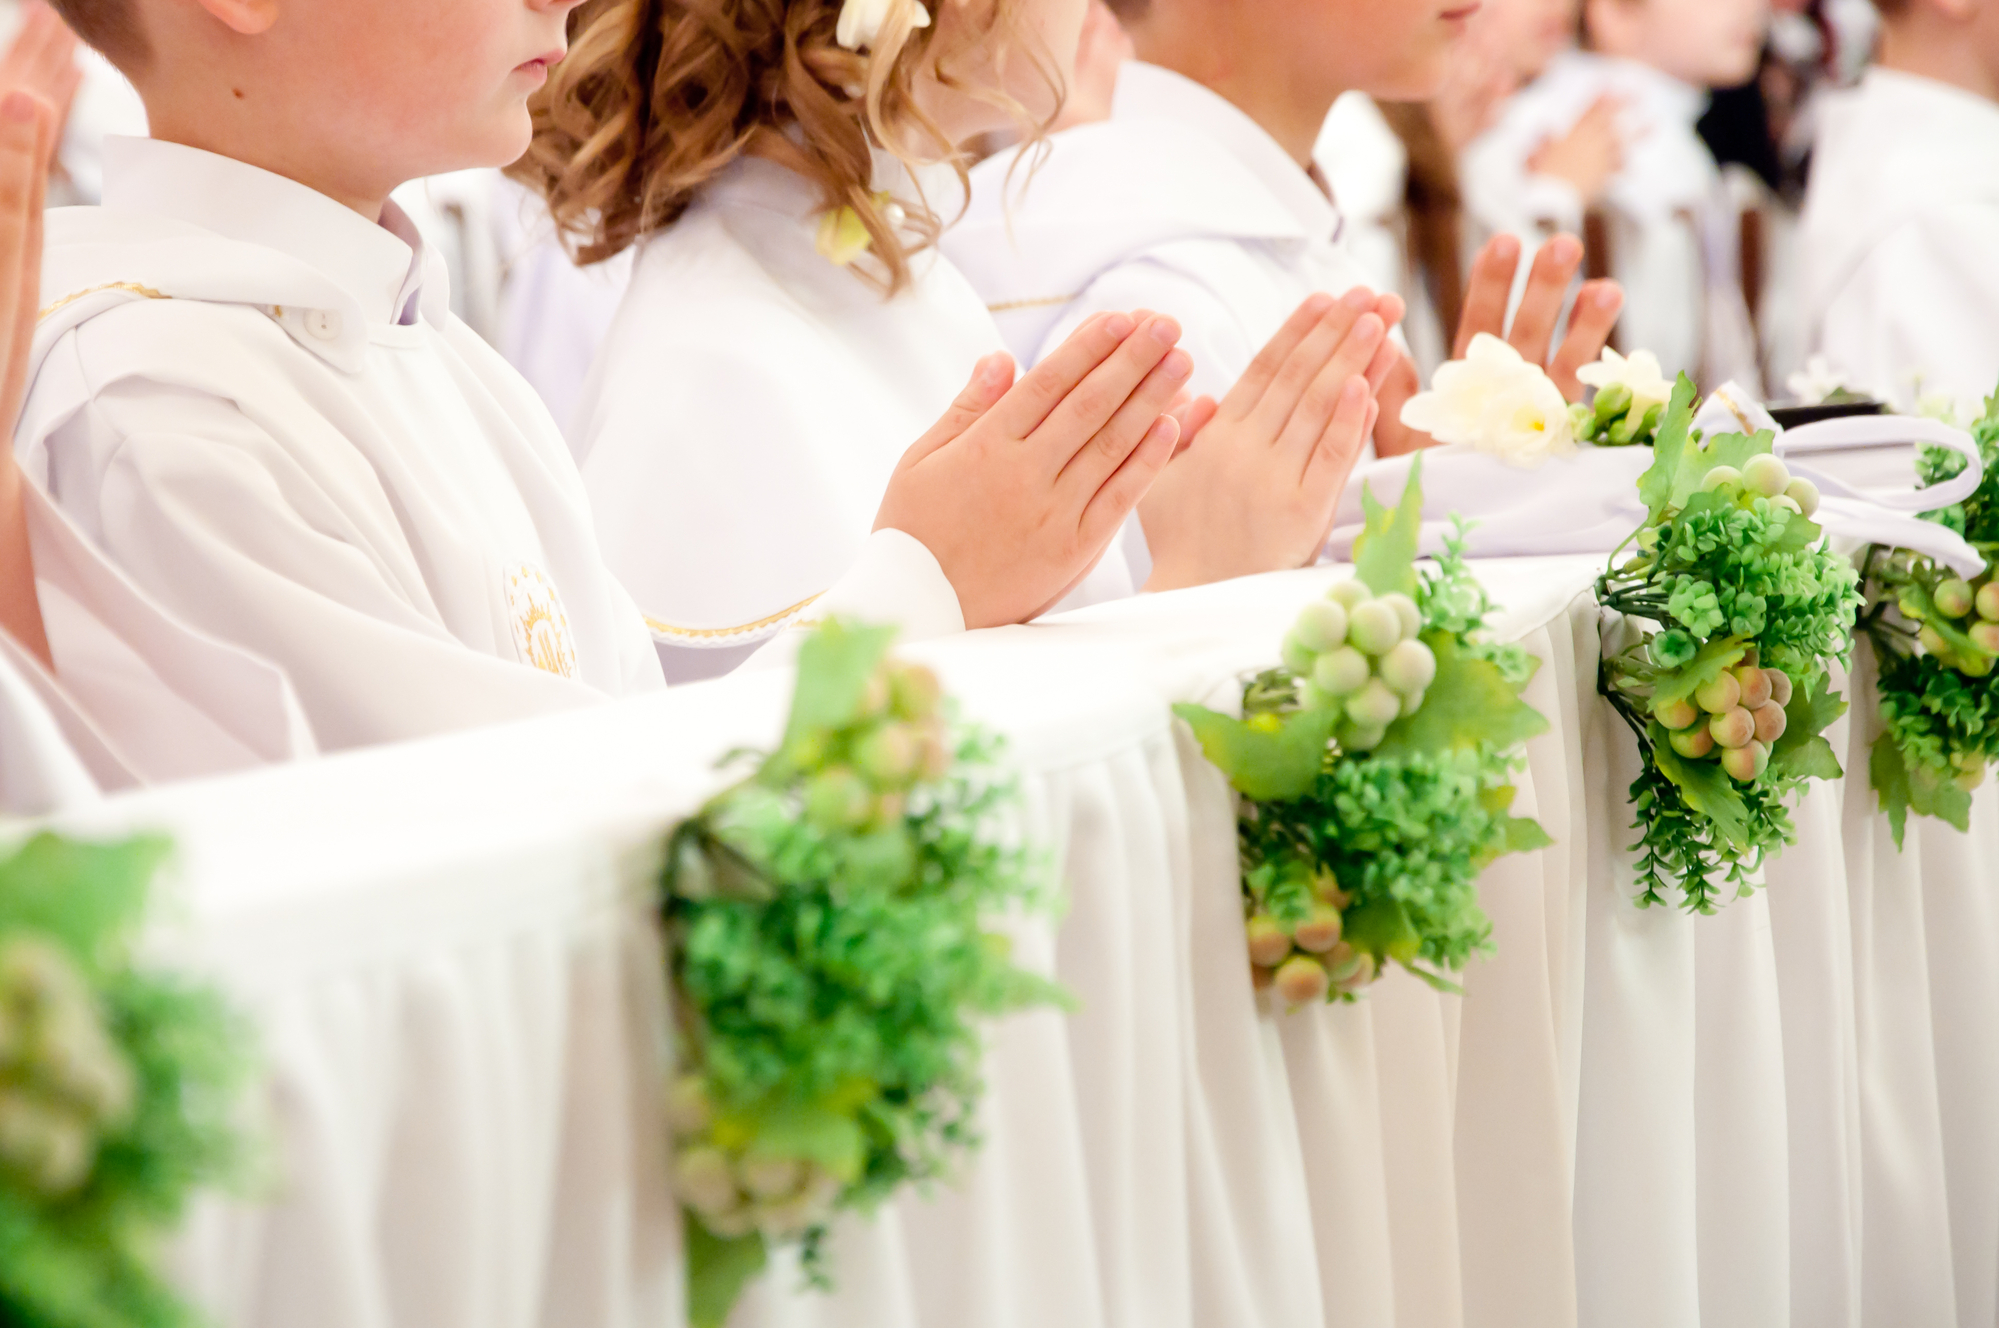 Children accepting the first Holy Communion